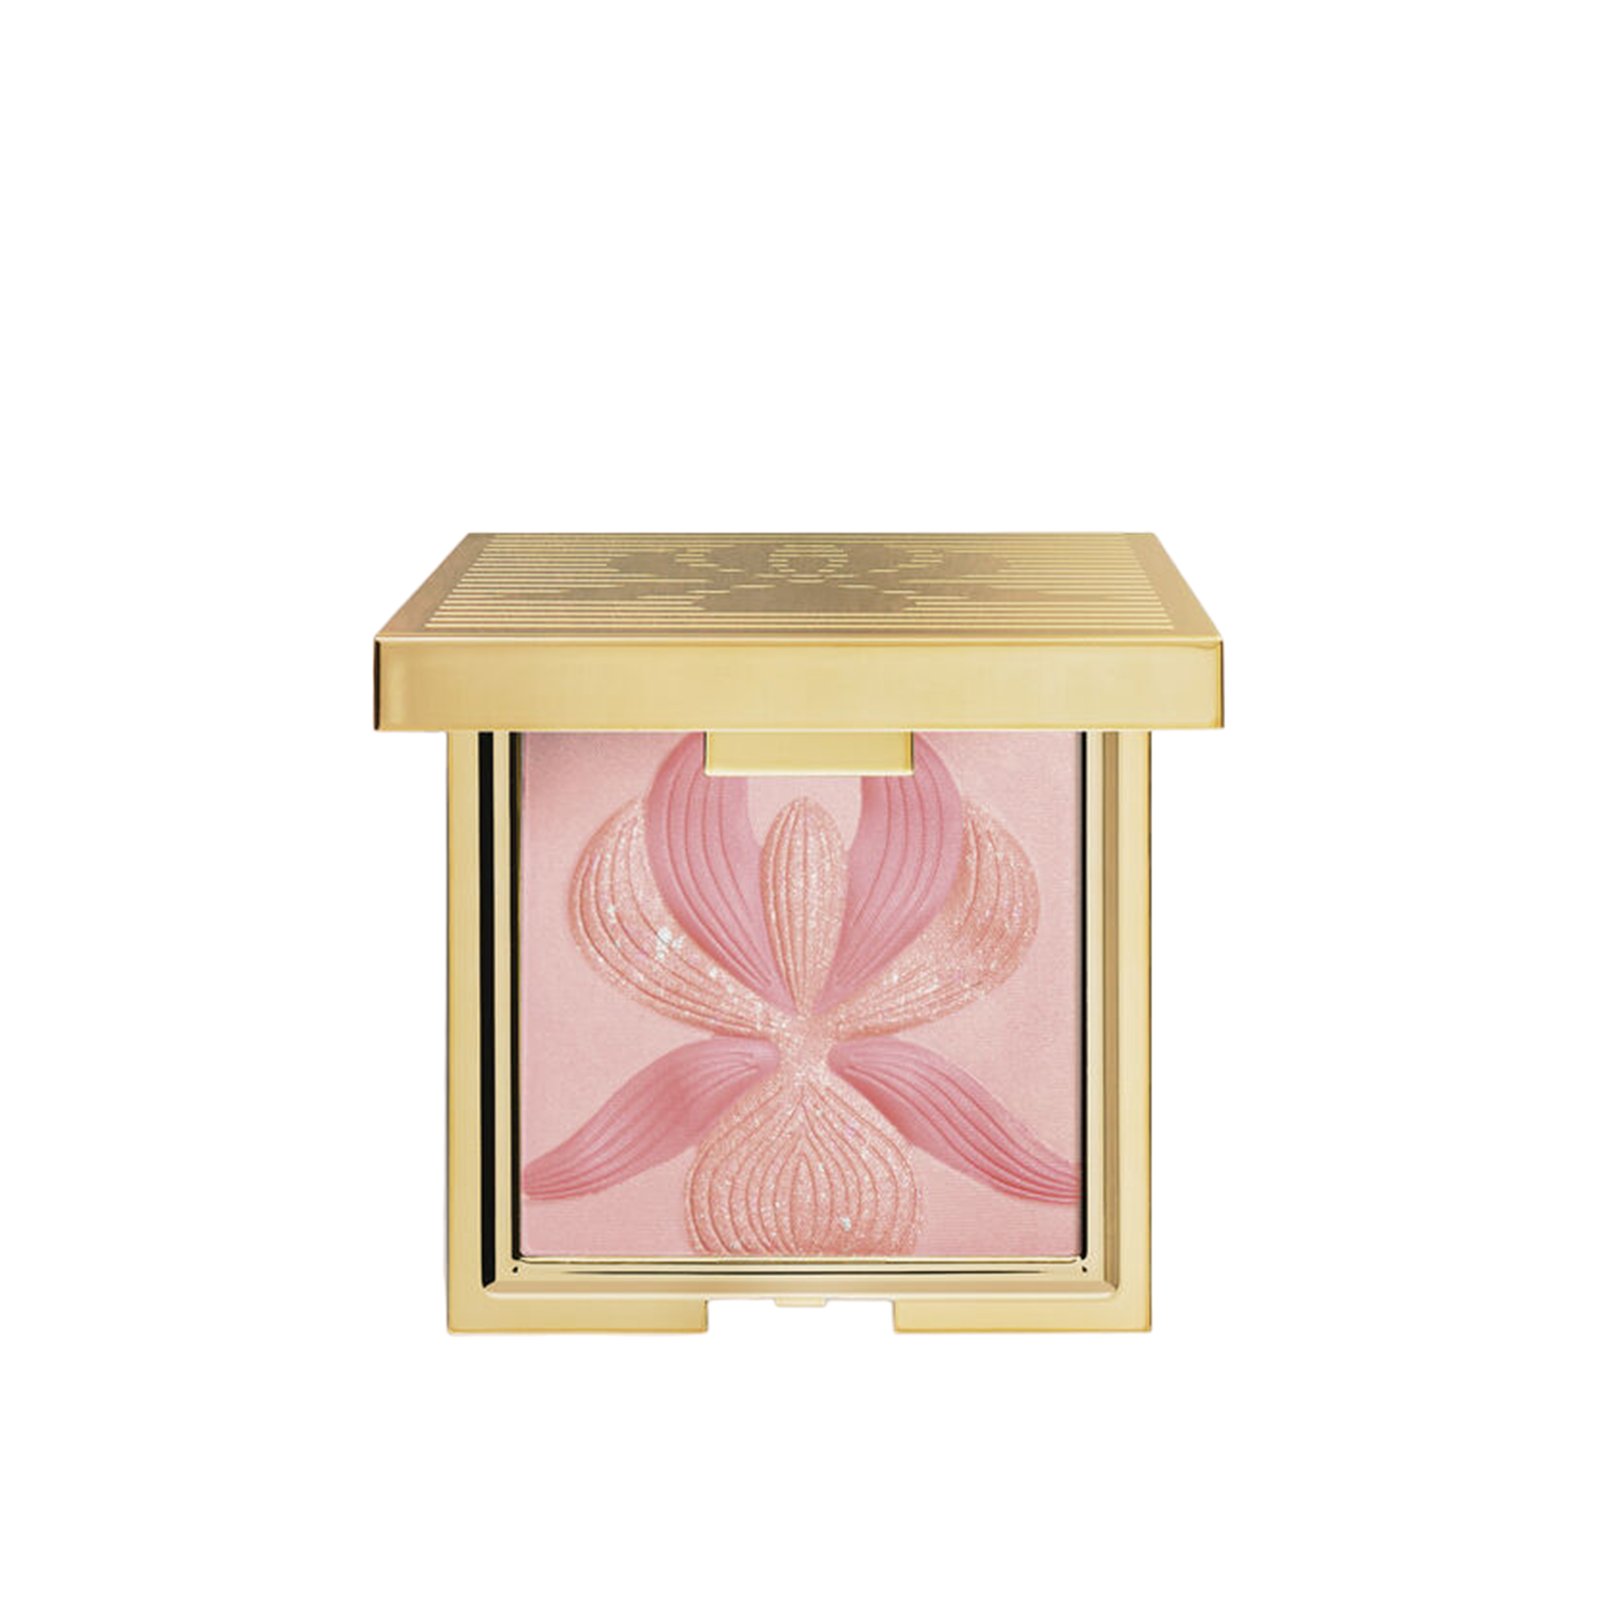 Sisley Paris Highlighter Blush With White Lily L'Orchidée Rose 15g